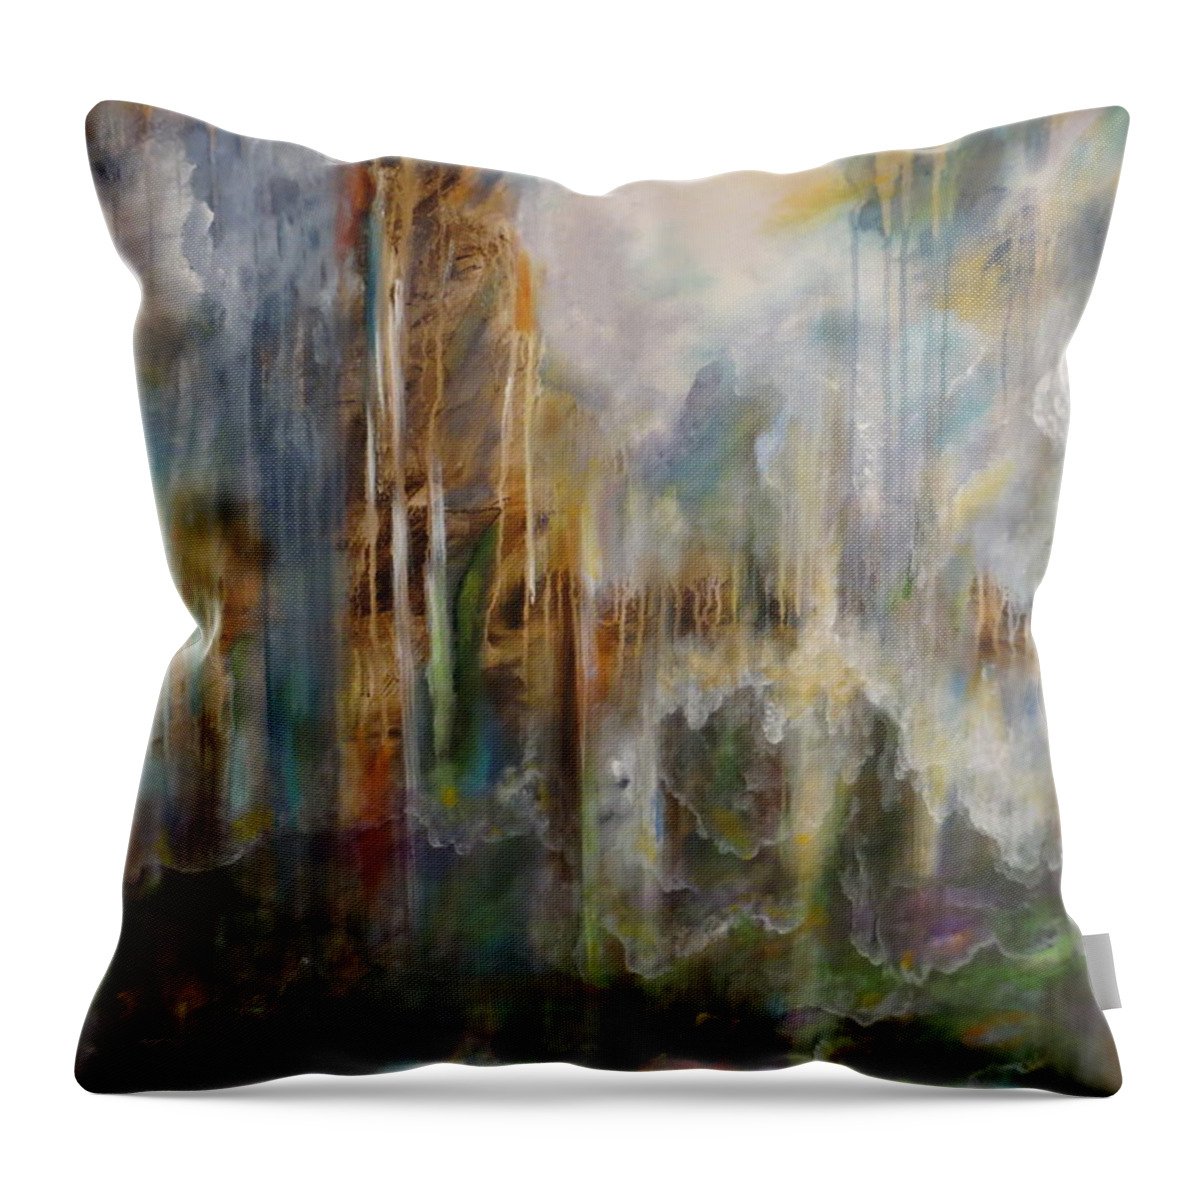 Large Throw Pillow featuring the painting Swept Away by Soraya Silvestri